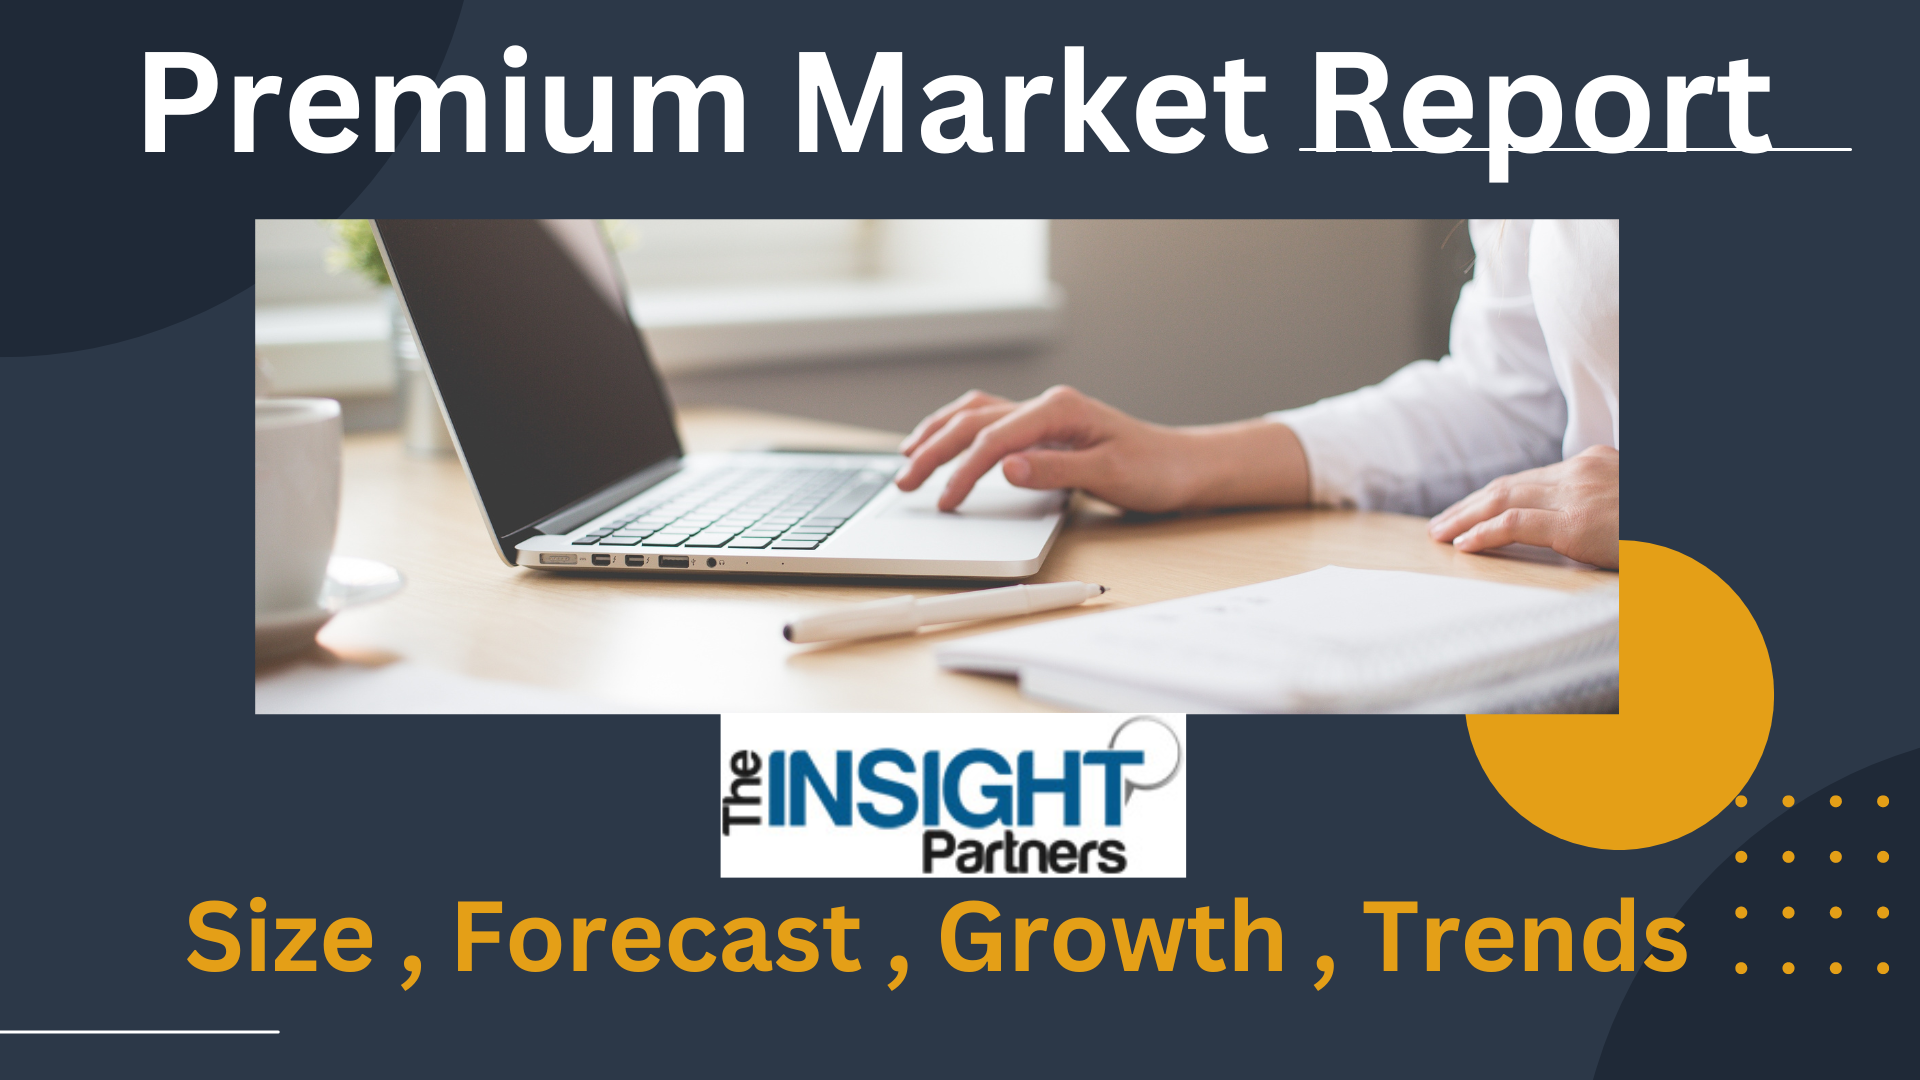 Malted Milk Market Forecast Growth Trends, Current Demand, and Development Report